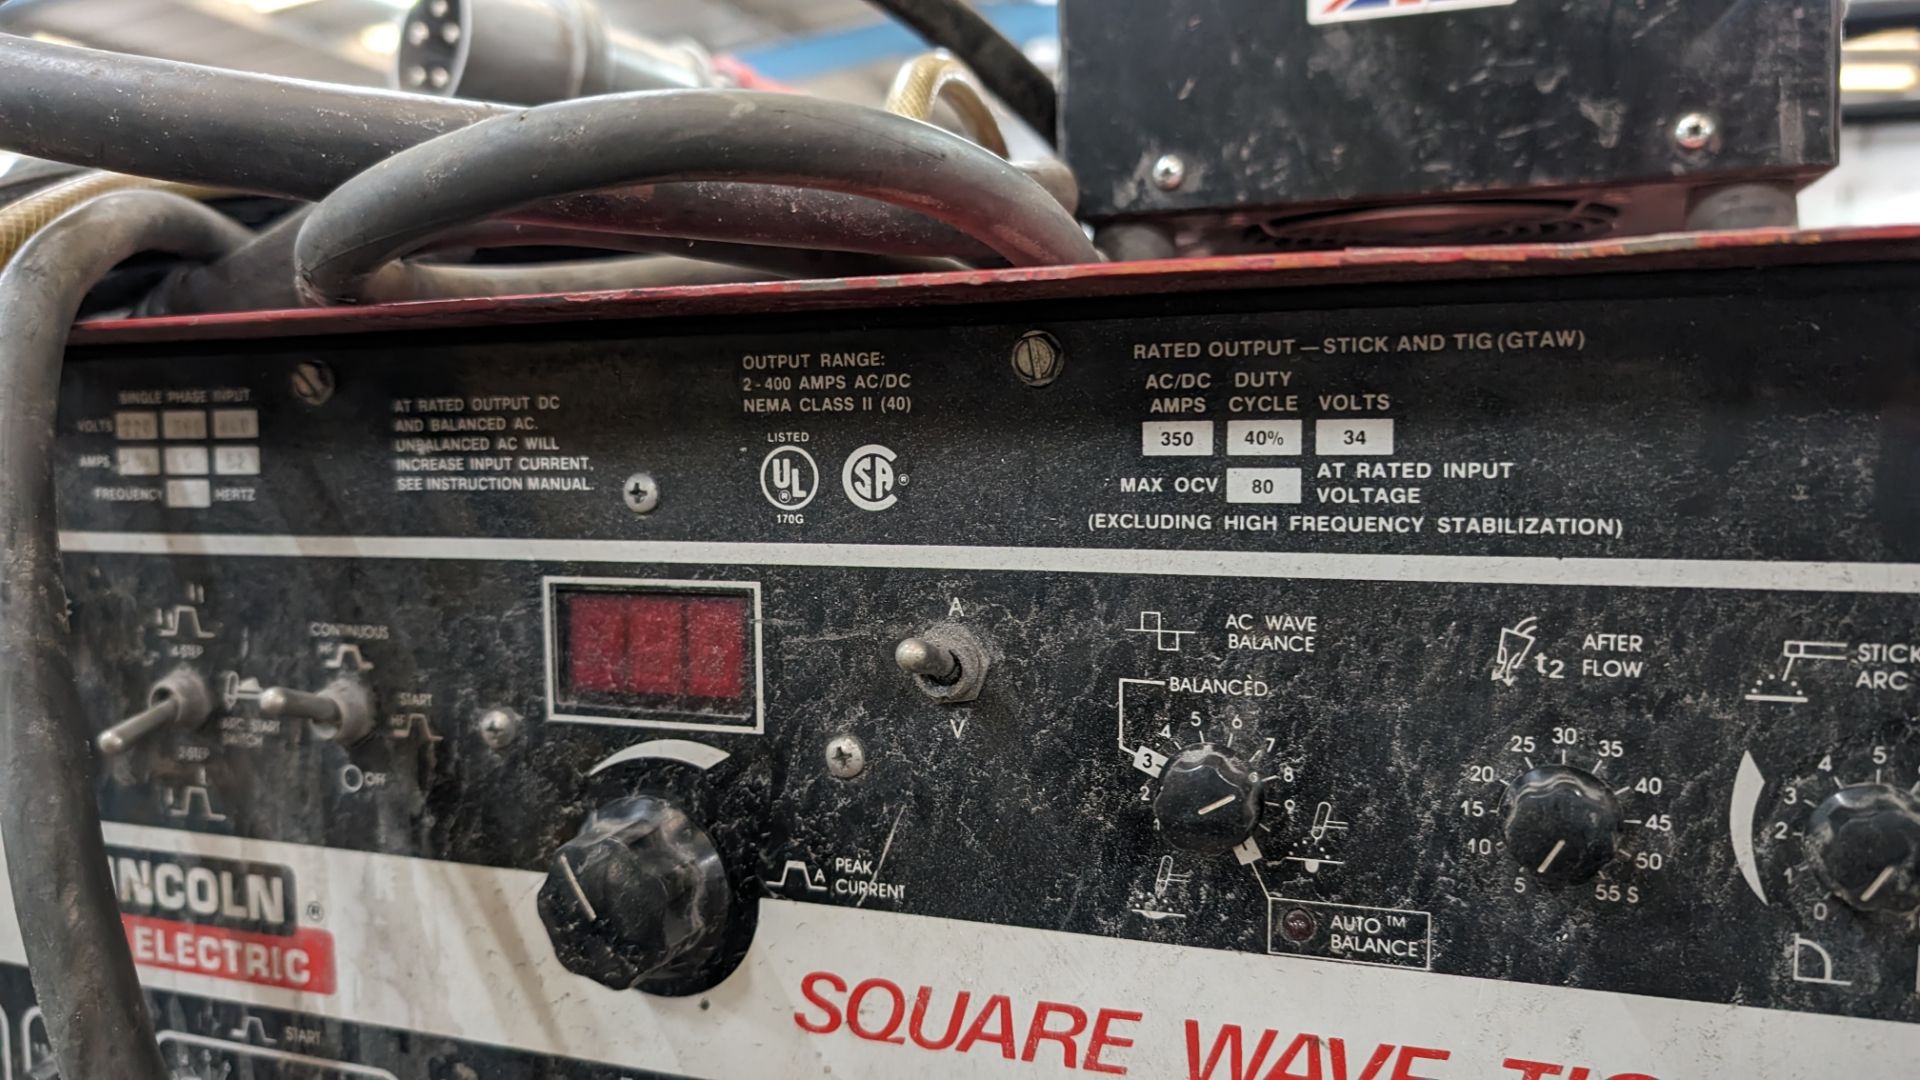 Lincoln electric square wave Tig-355 - Image 13 of 13